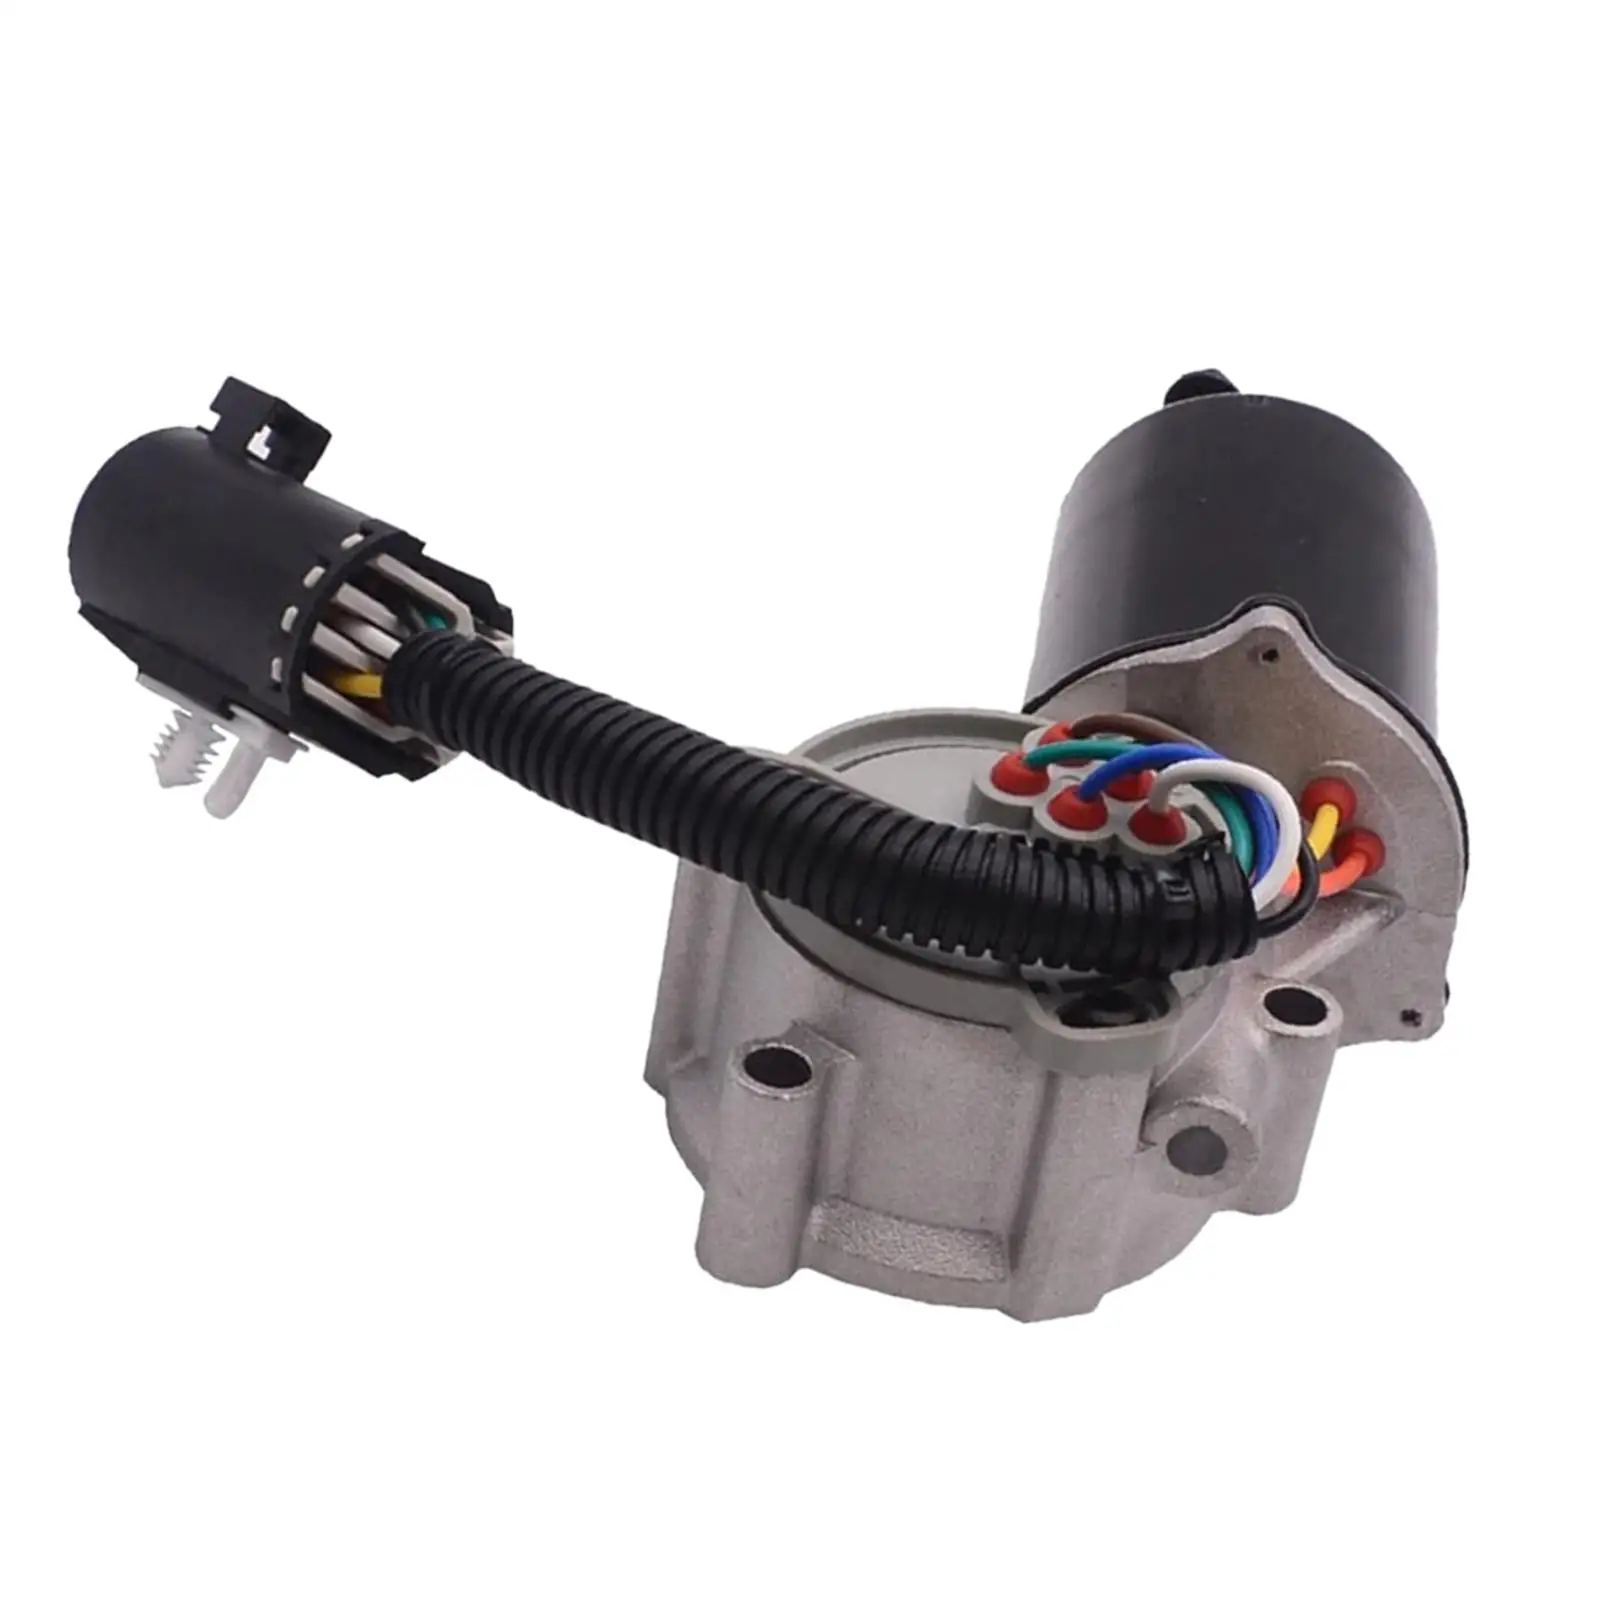 Shift Motor Premium Spare Parts High Performance Replaces Durable 47303-h1010 47303-h1001 for Kia Sorento 2006-2008